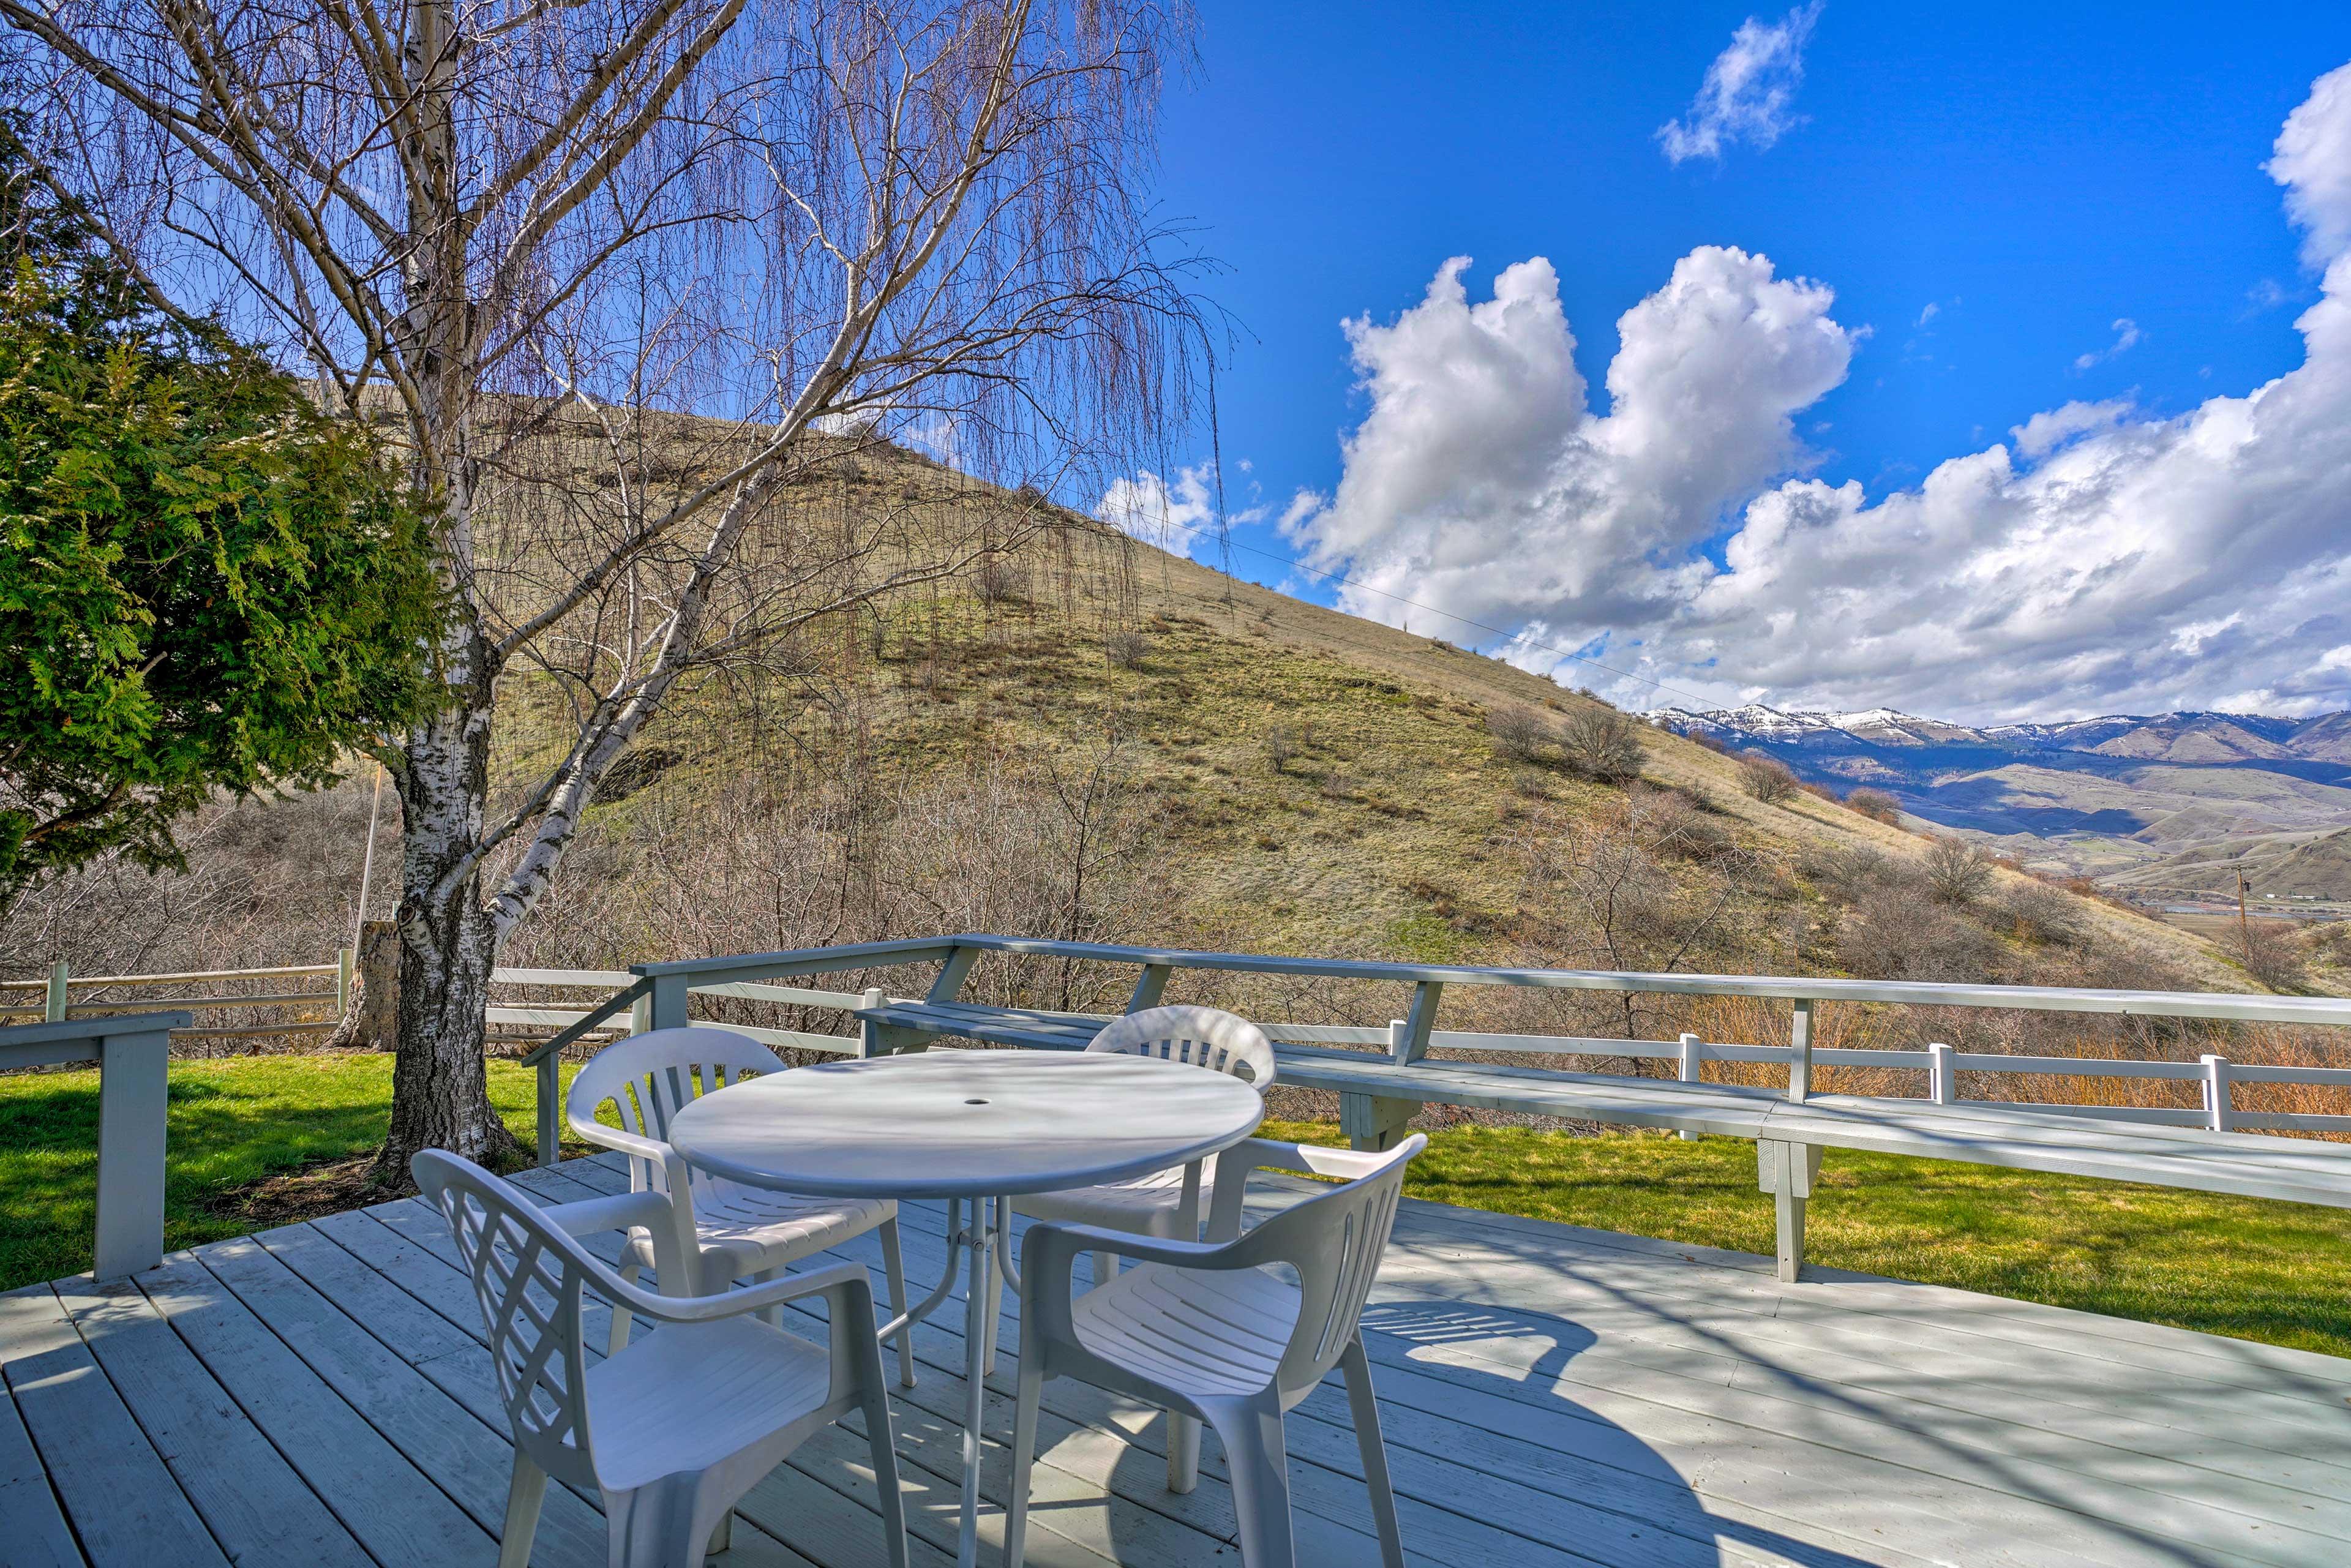 Eat dinner outside on the spacious back deck with views.